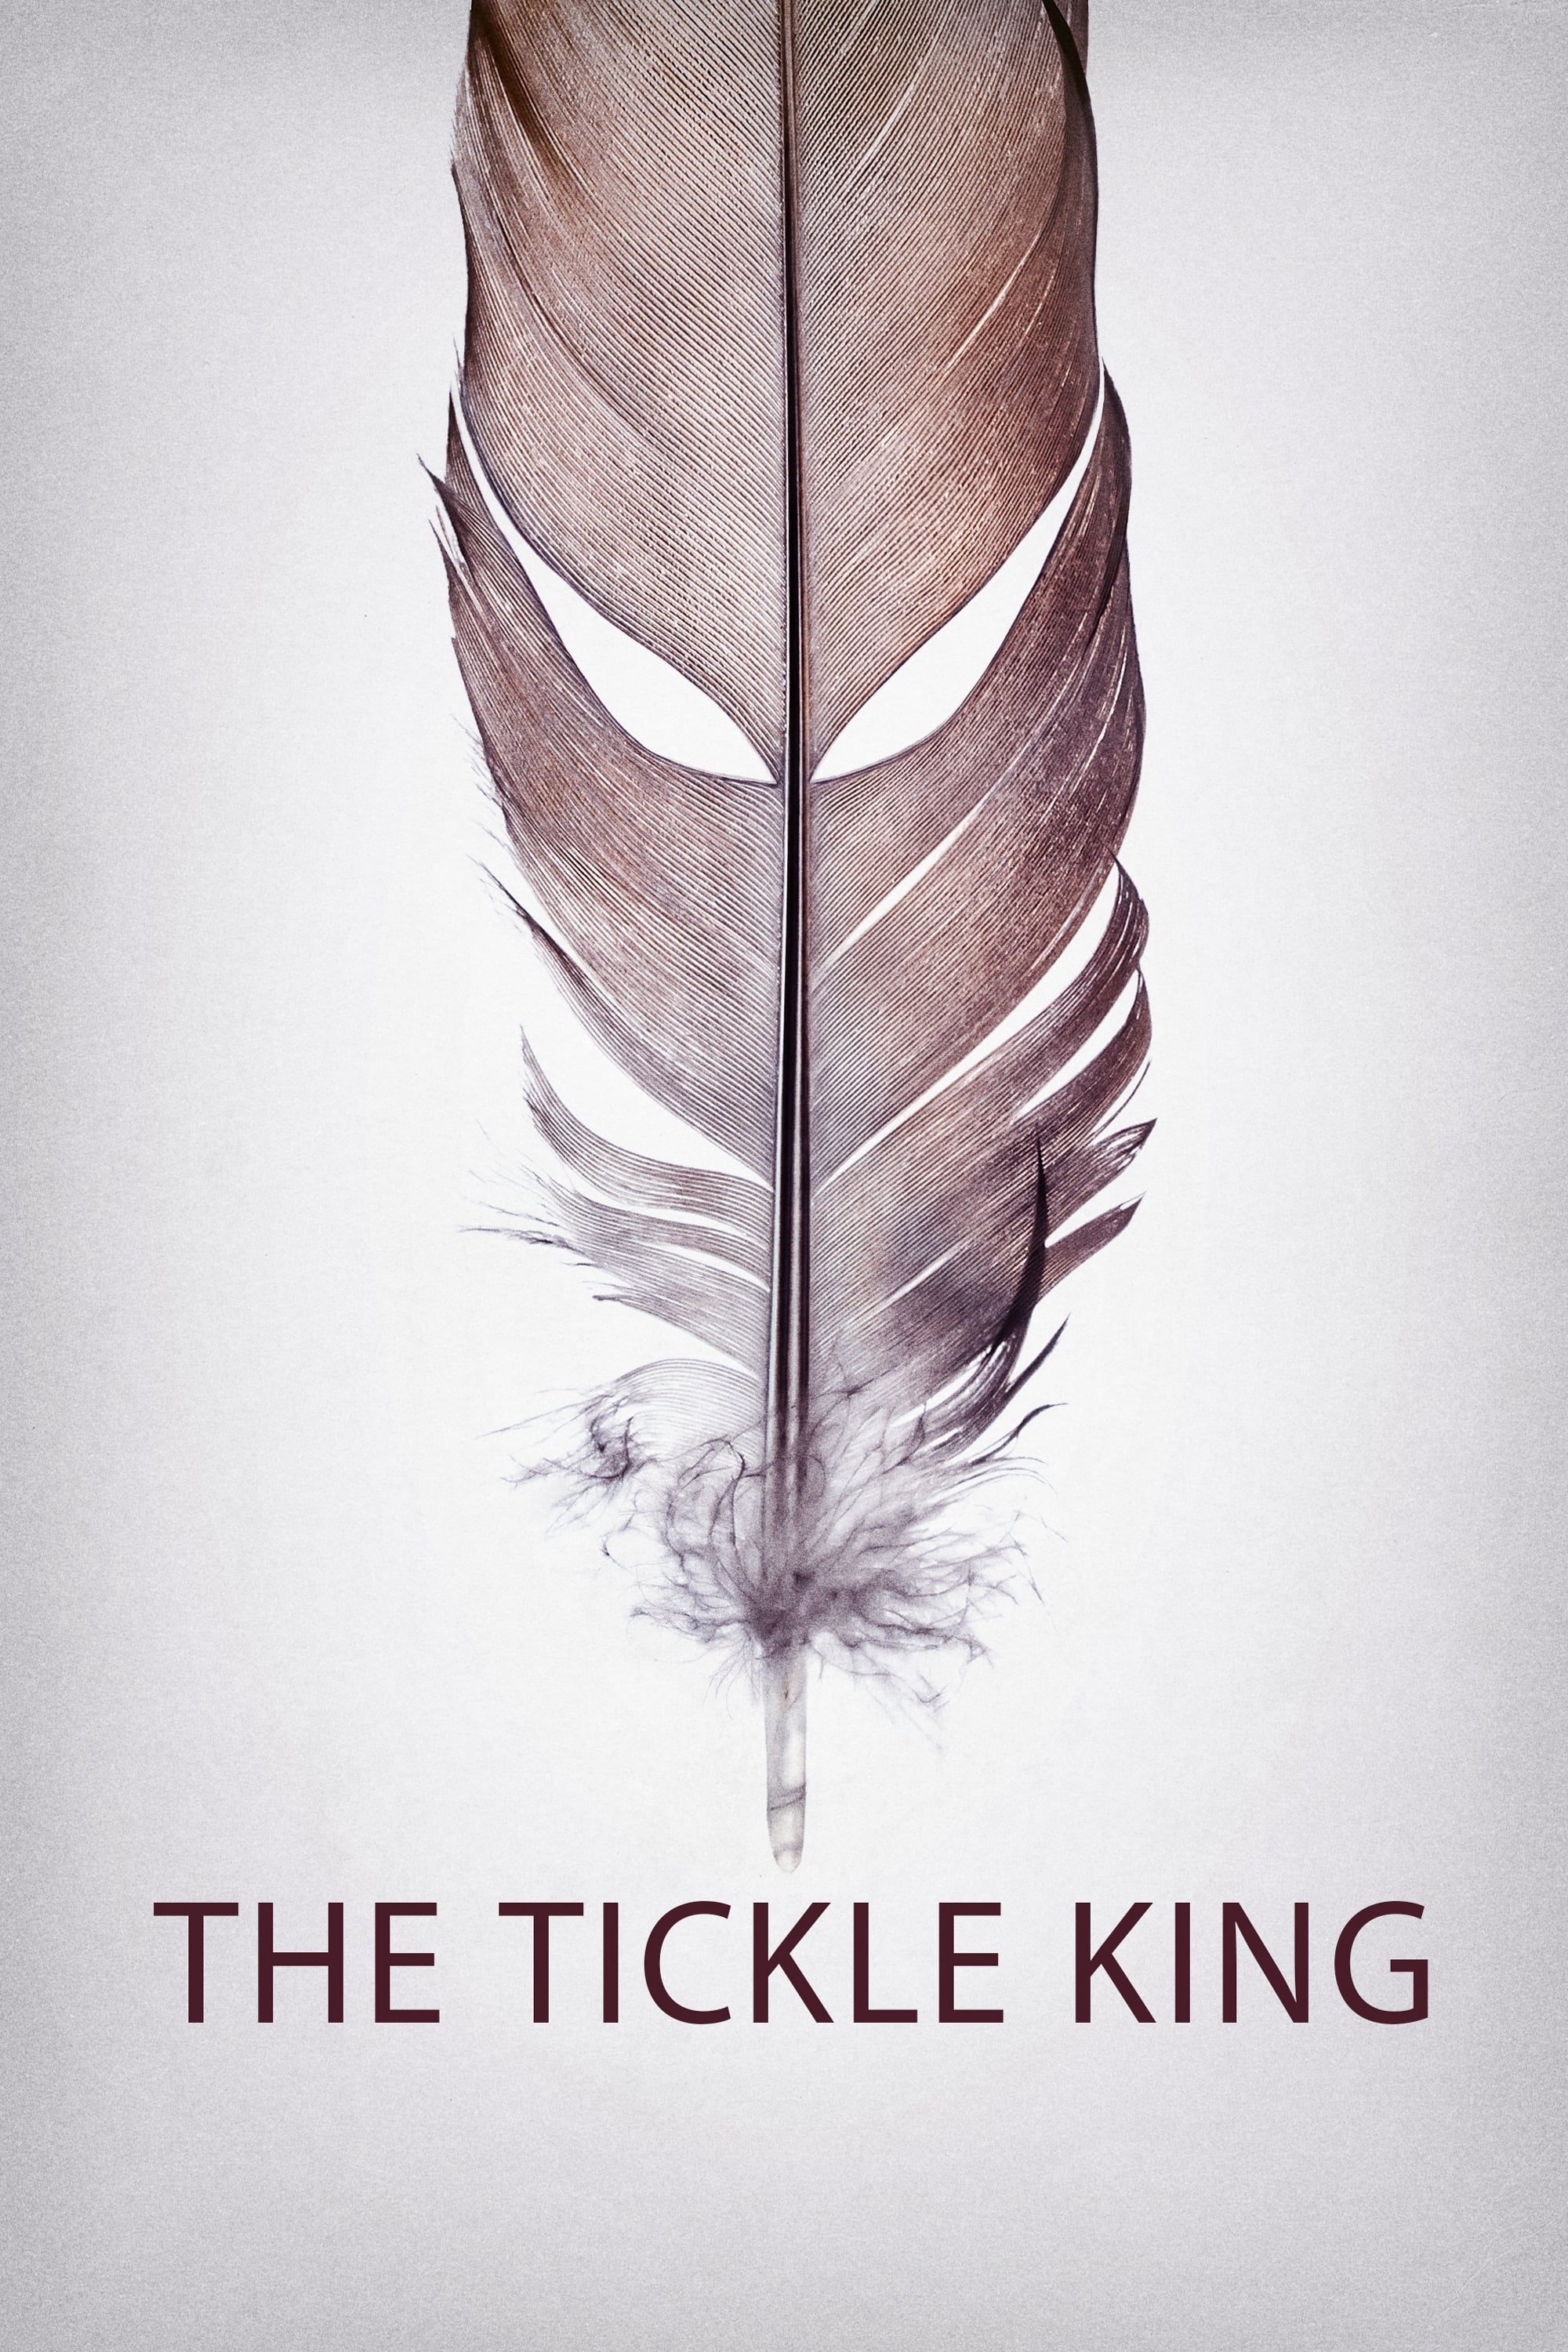 The Tickle King film